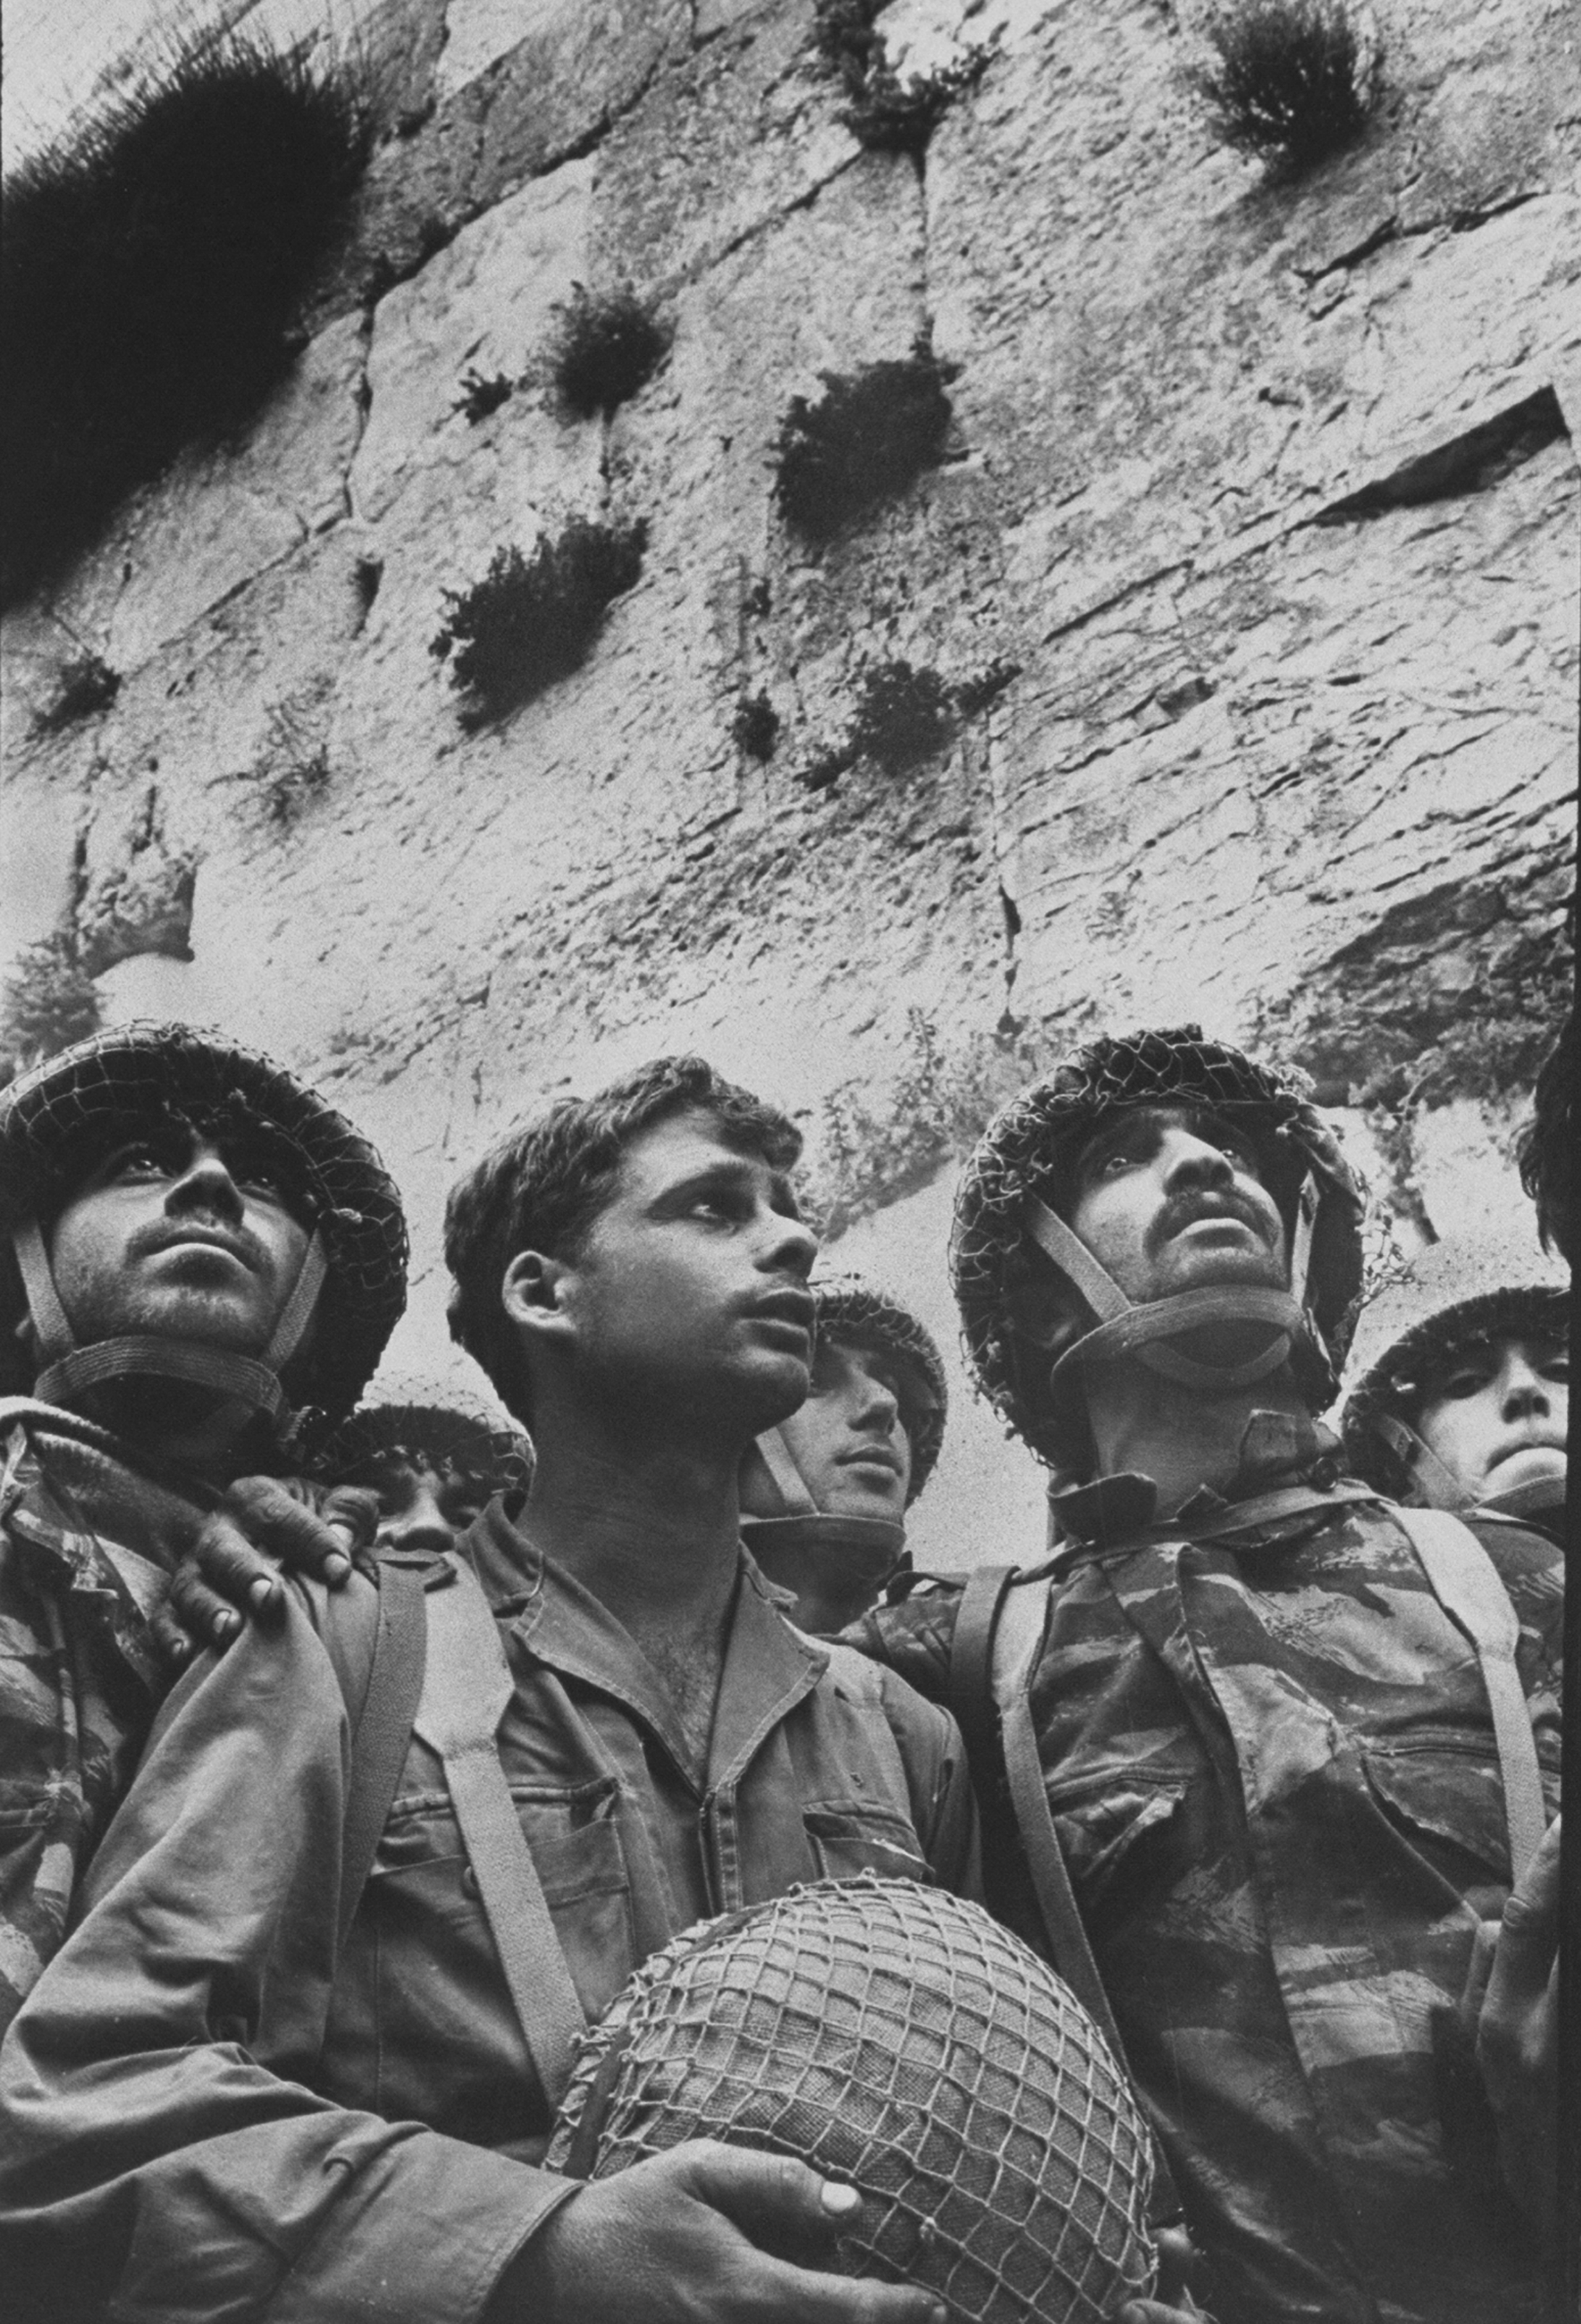 Small group of Israeli soldiers at the wailing wall after it was recaptured during the 1967 war.